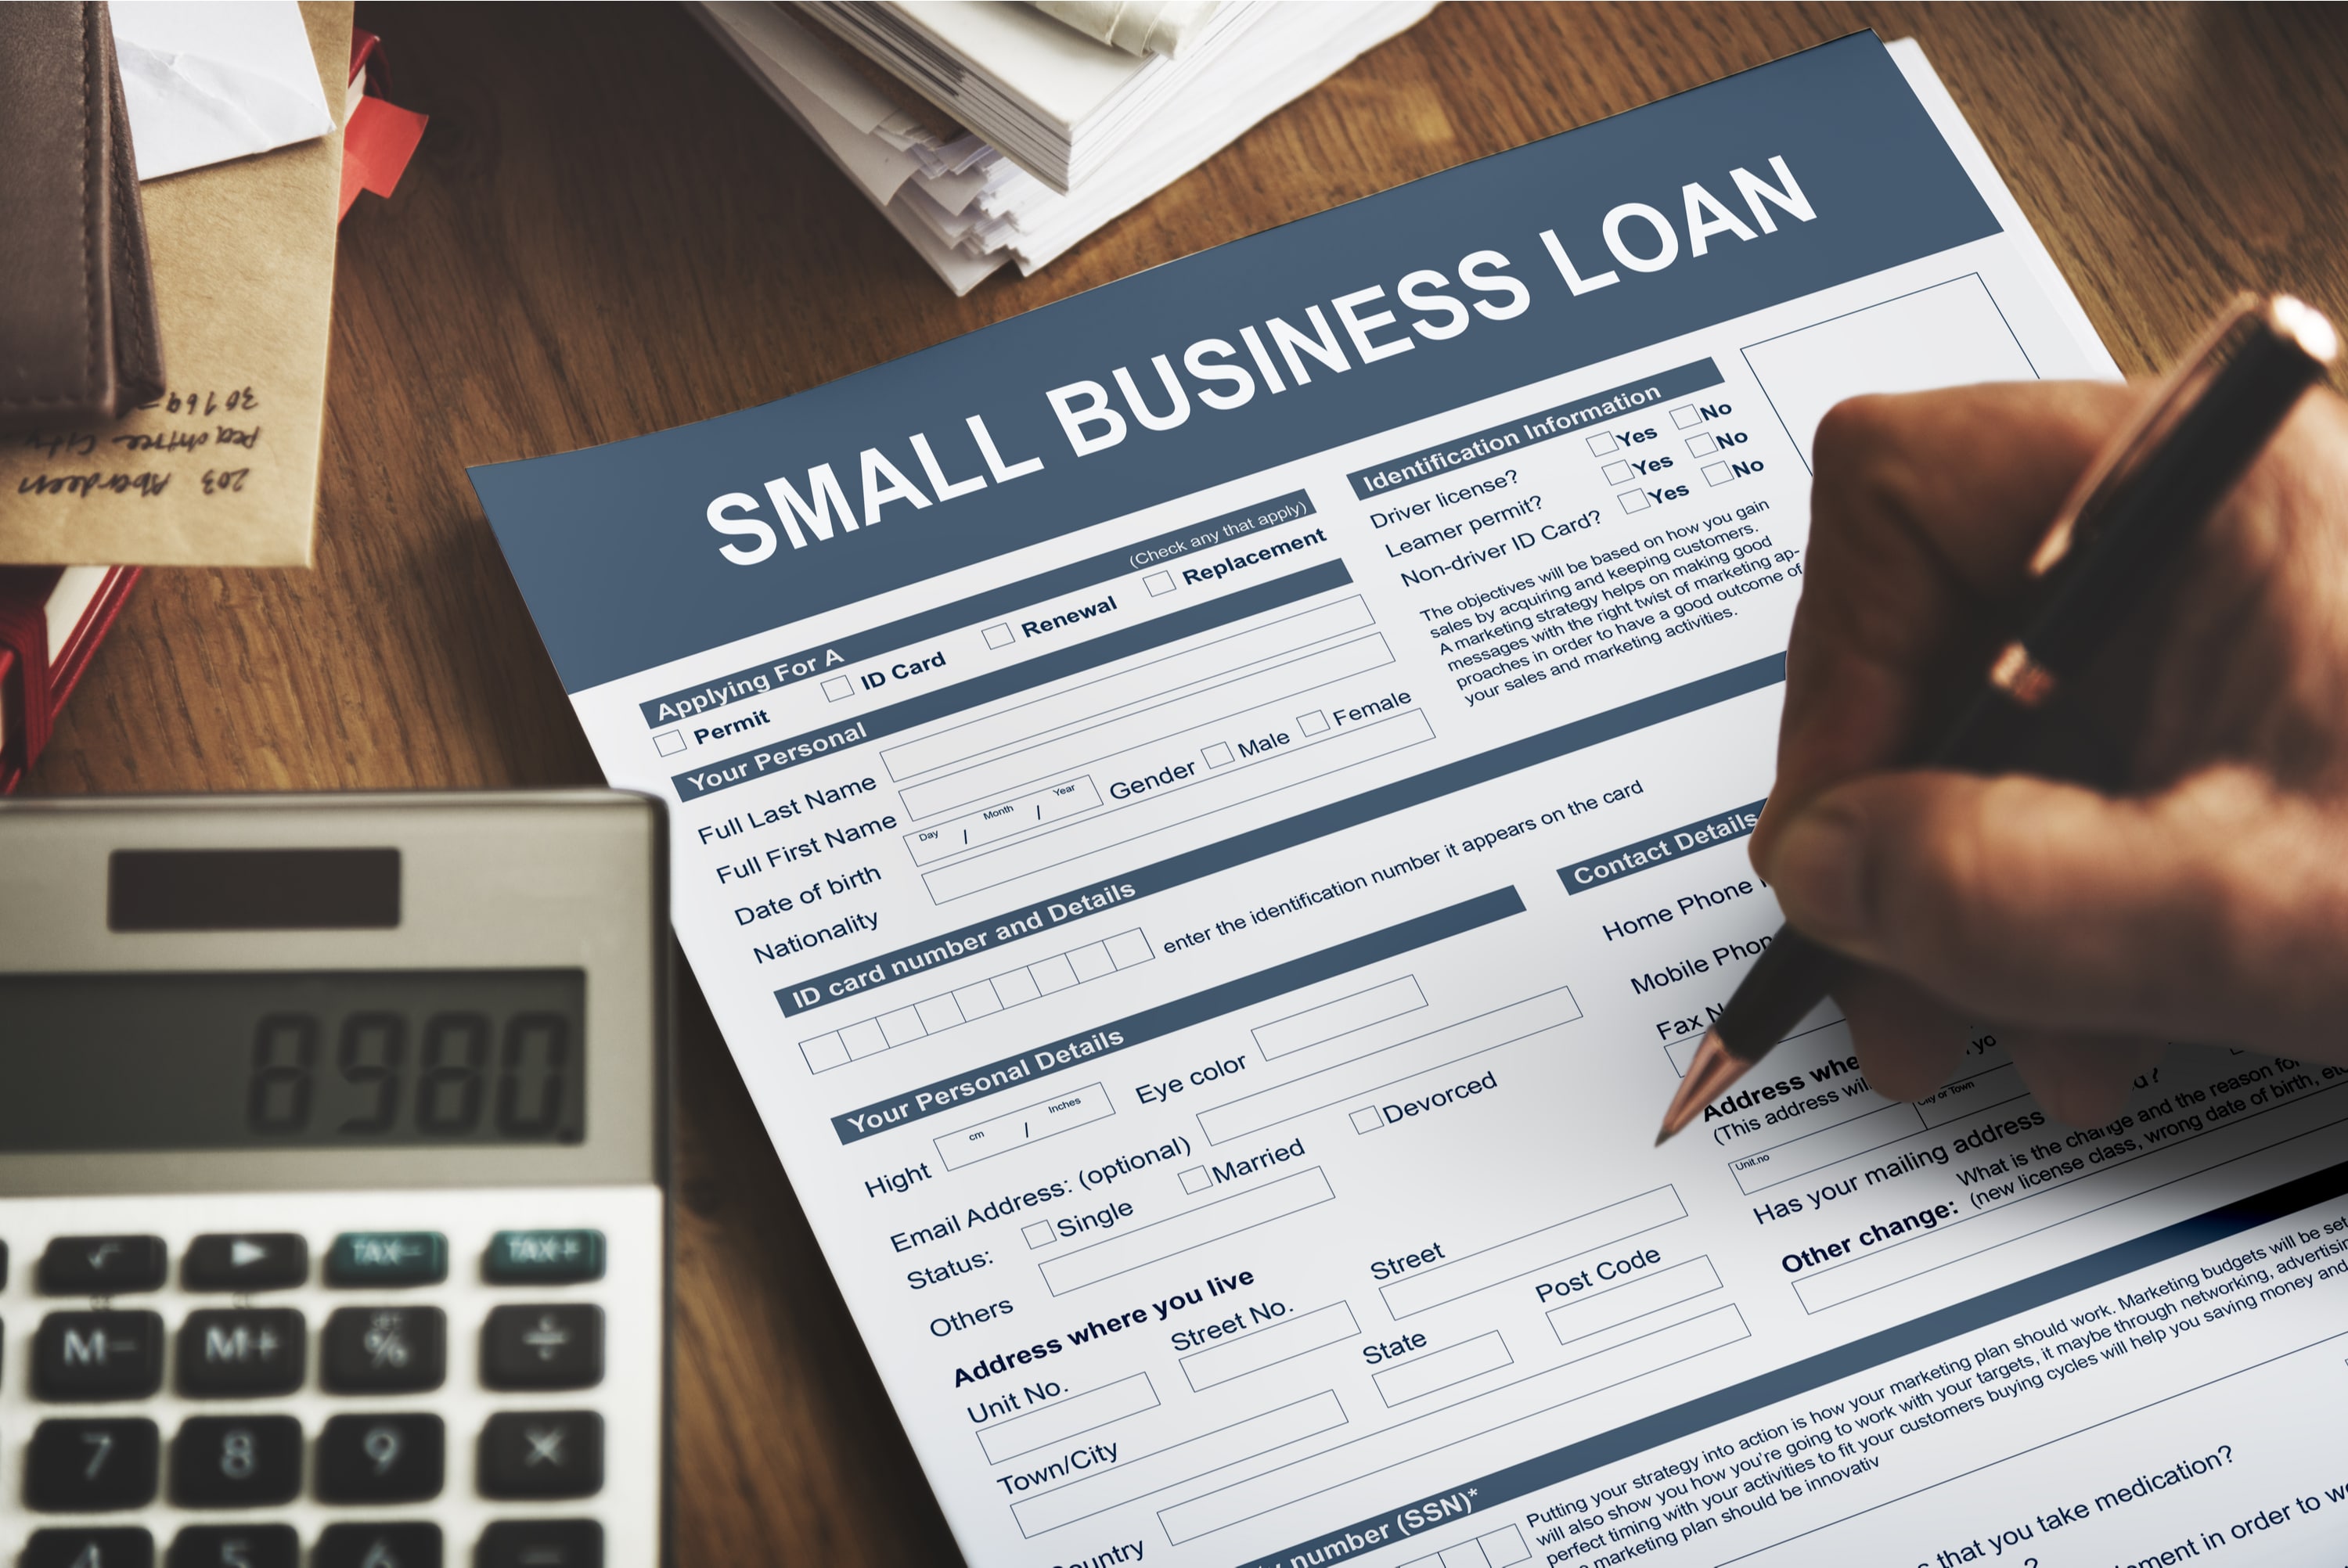 7 Types of Small Business Loans - Pros & Cons